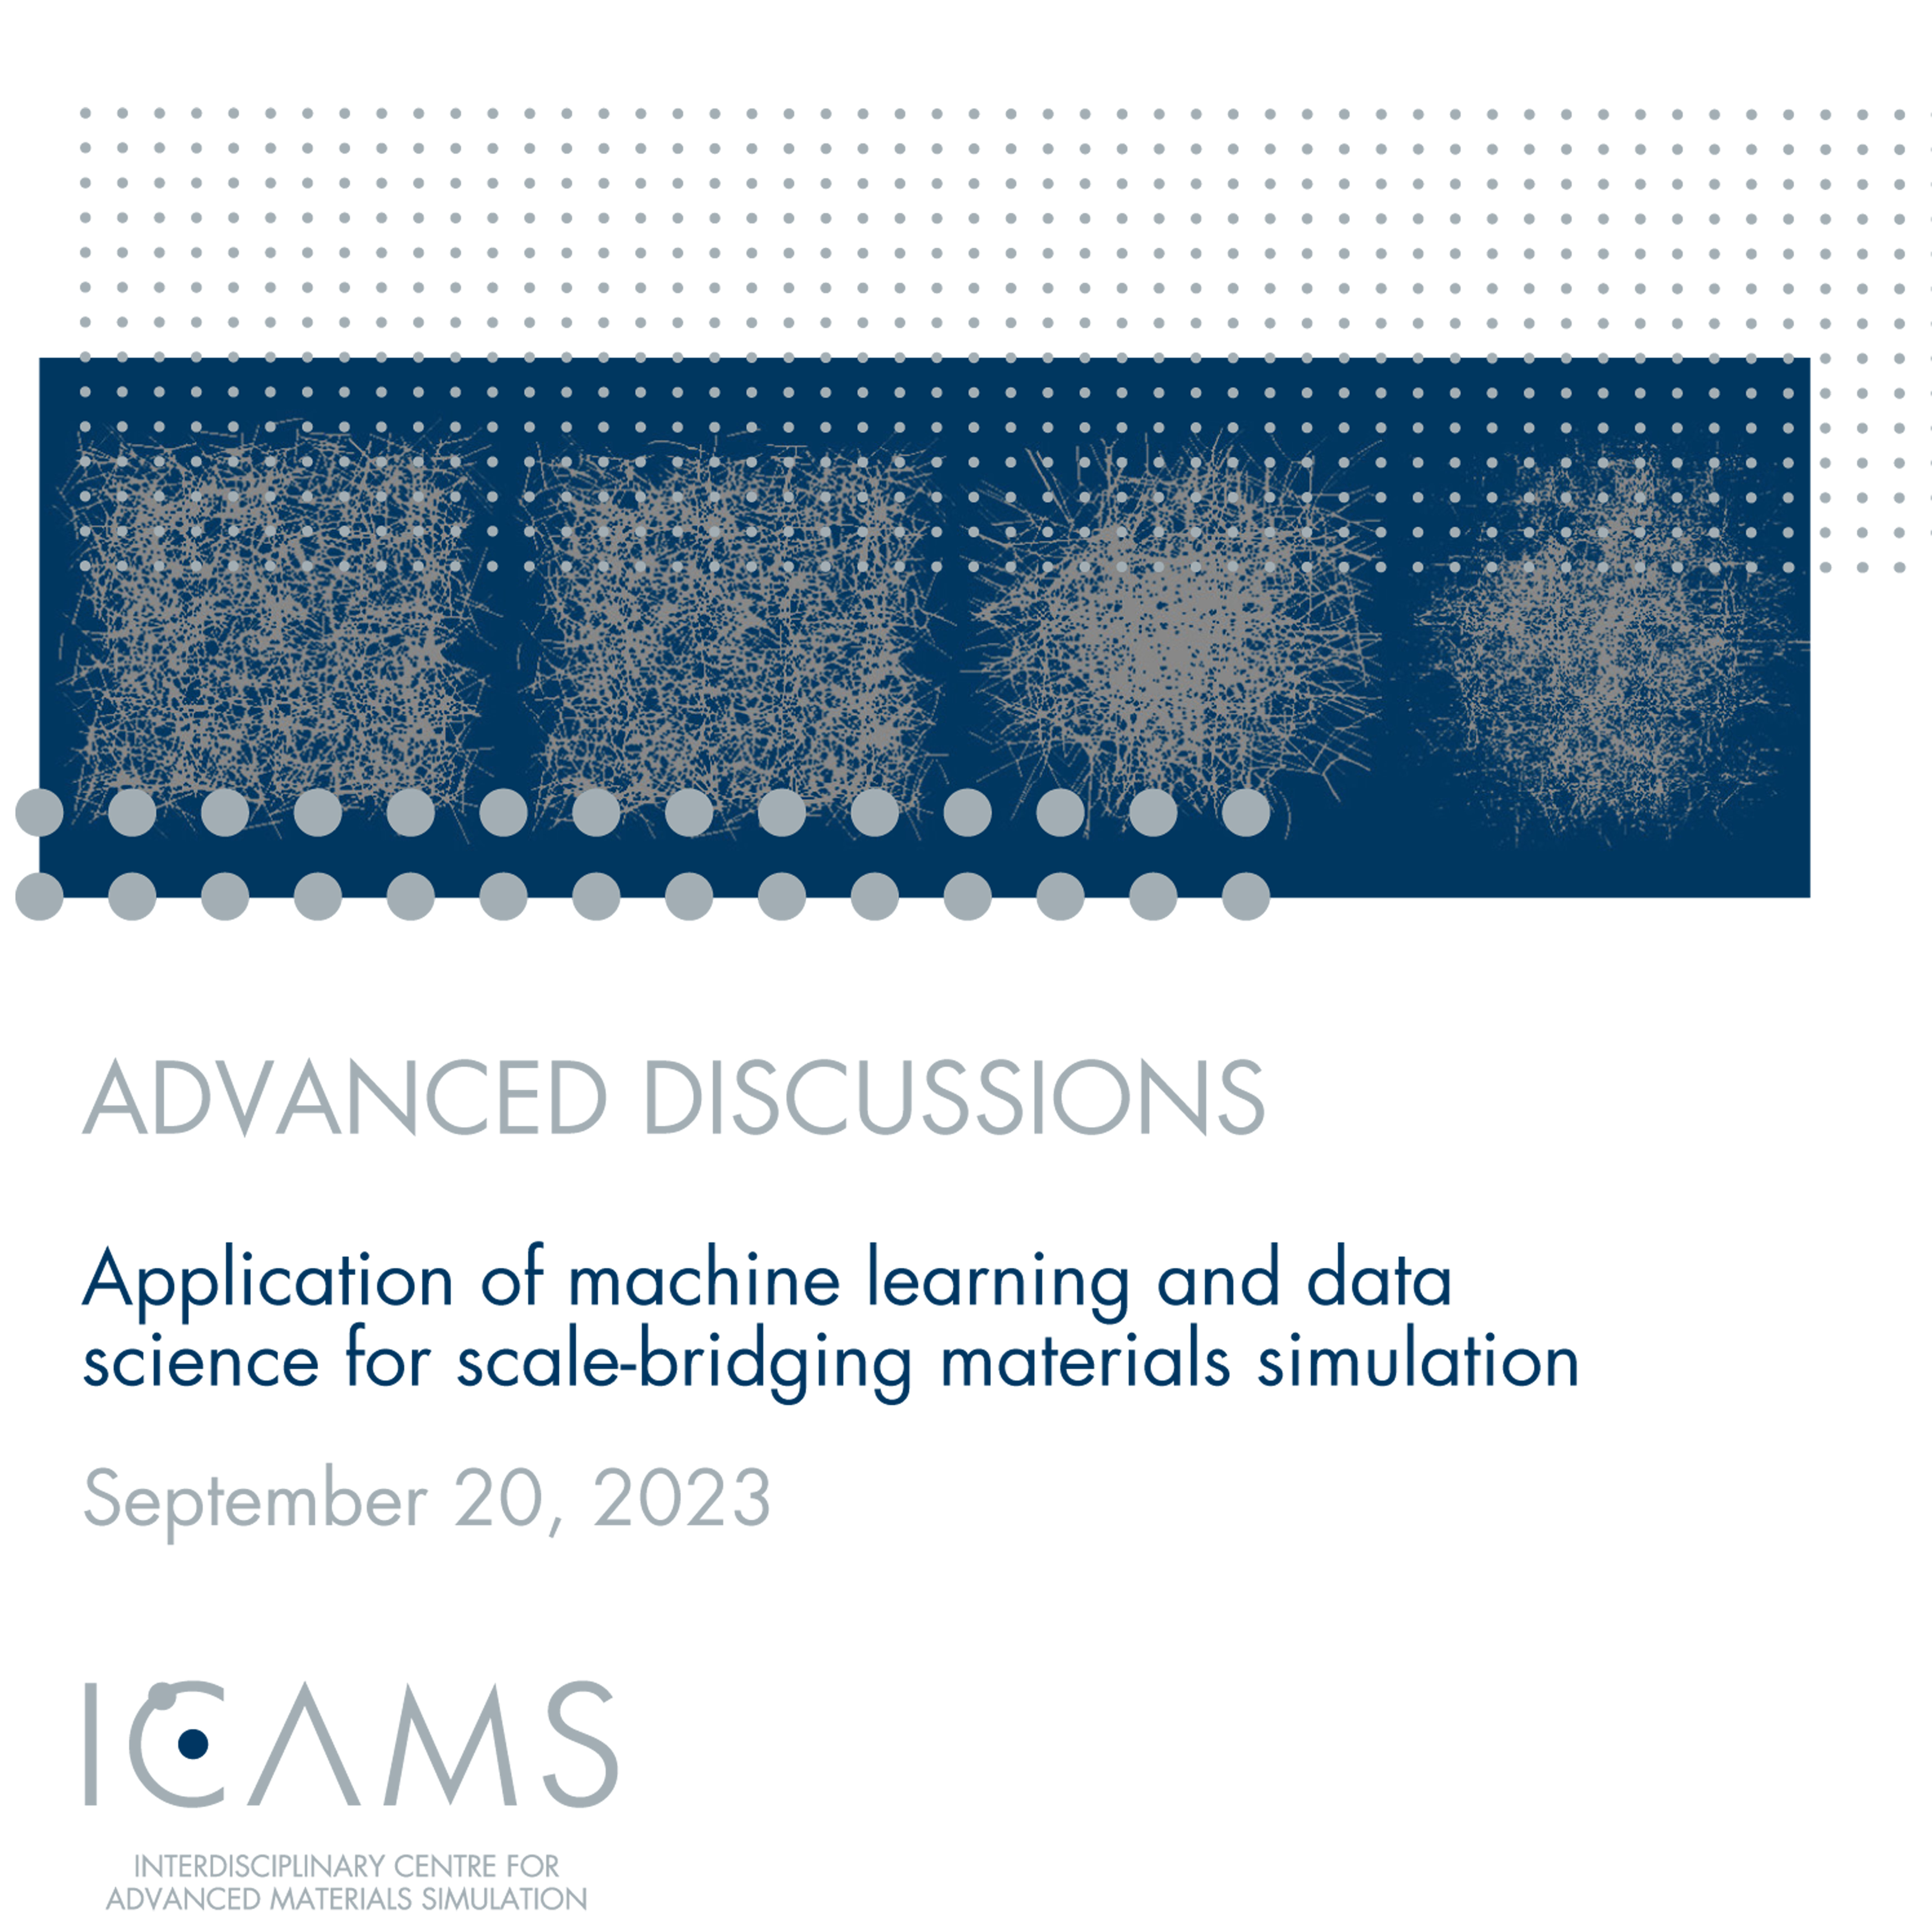 ICAMS Advanced Discussions 2023: Application of machine learning and data science for scale-bridging materials simulation